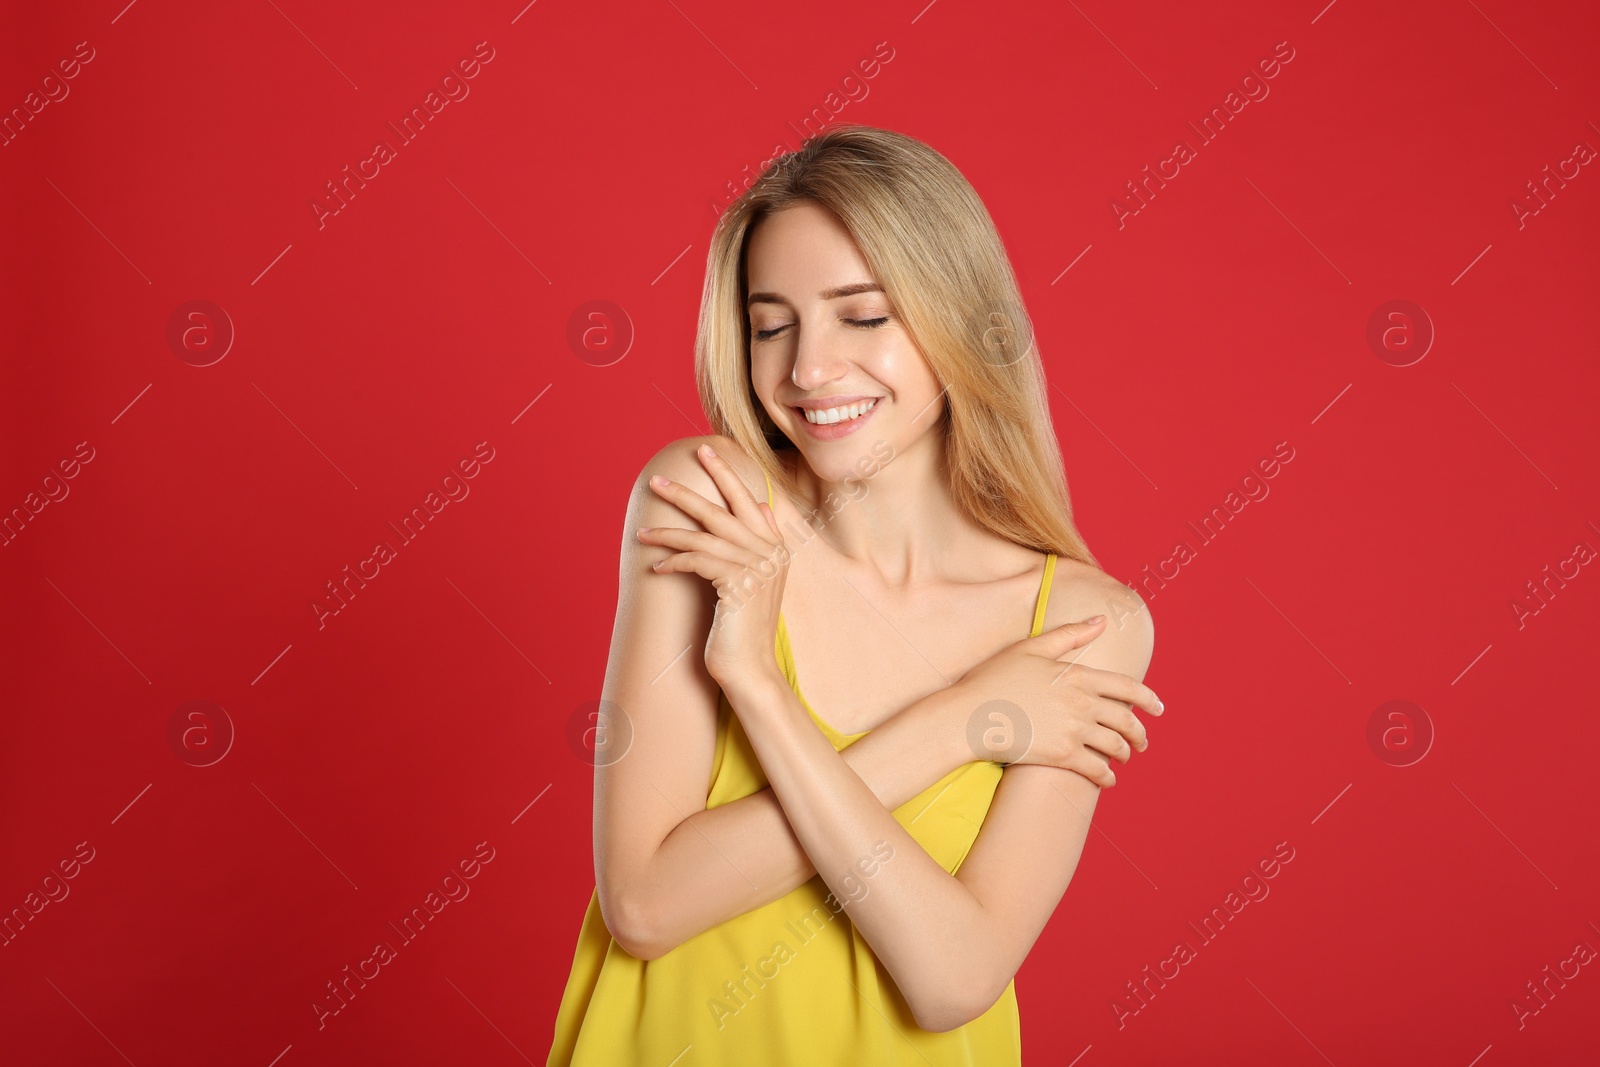 Photo of Portrait of beautiful young woman with blonde hair on red background